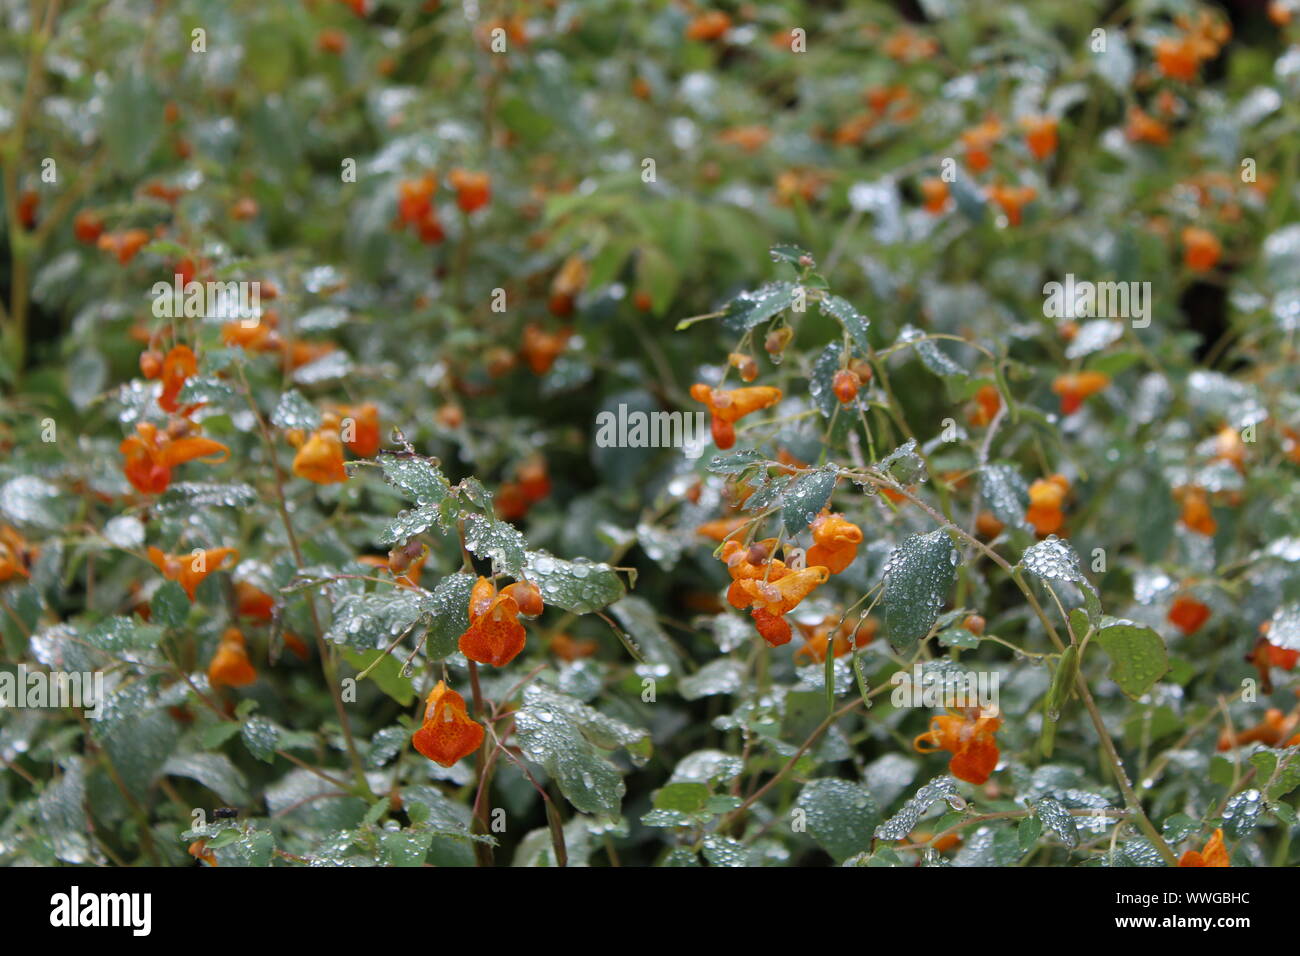 sparkling water droplets on plants with bright orange flowers from the mist of the niagara falls Stock Photo